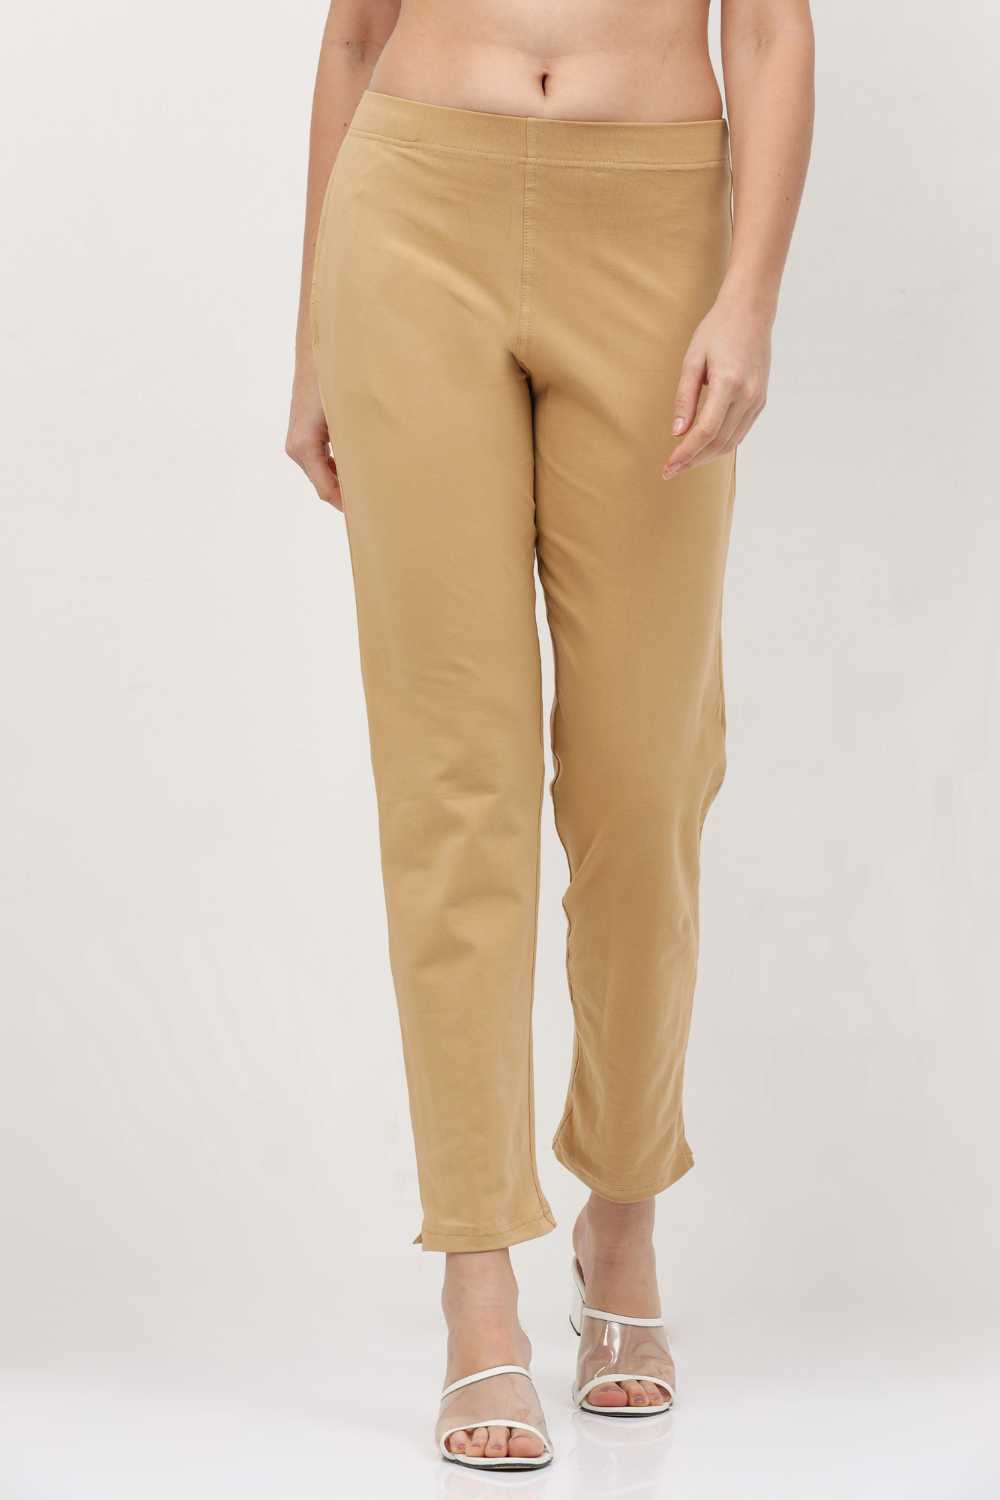 Buy DIGITAL SHOPEE Cotton Women Trouser Pant Use for Formal Office High  Waist for Wide Leg Ankle Length Straight Pencil Pant (Beige_Large) at  Amazon.in